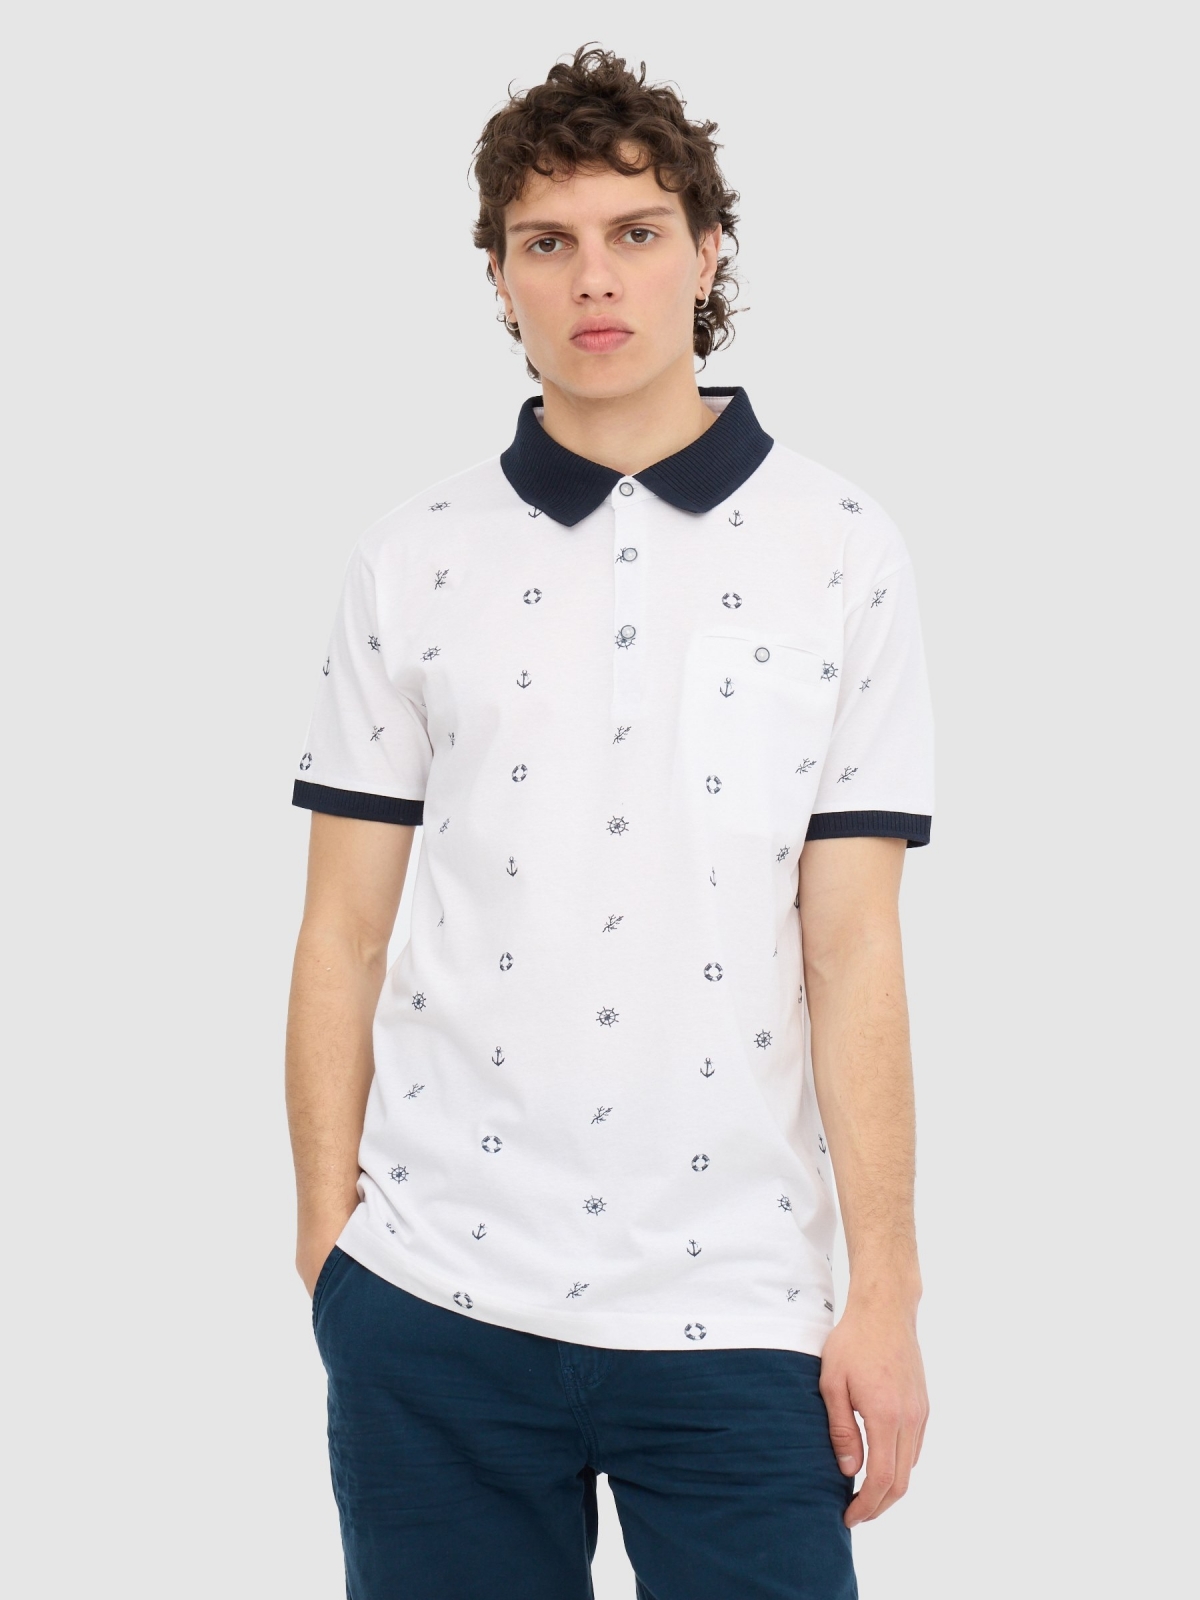 Sailor polo shirt white middle front view